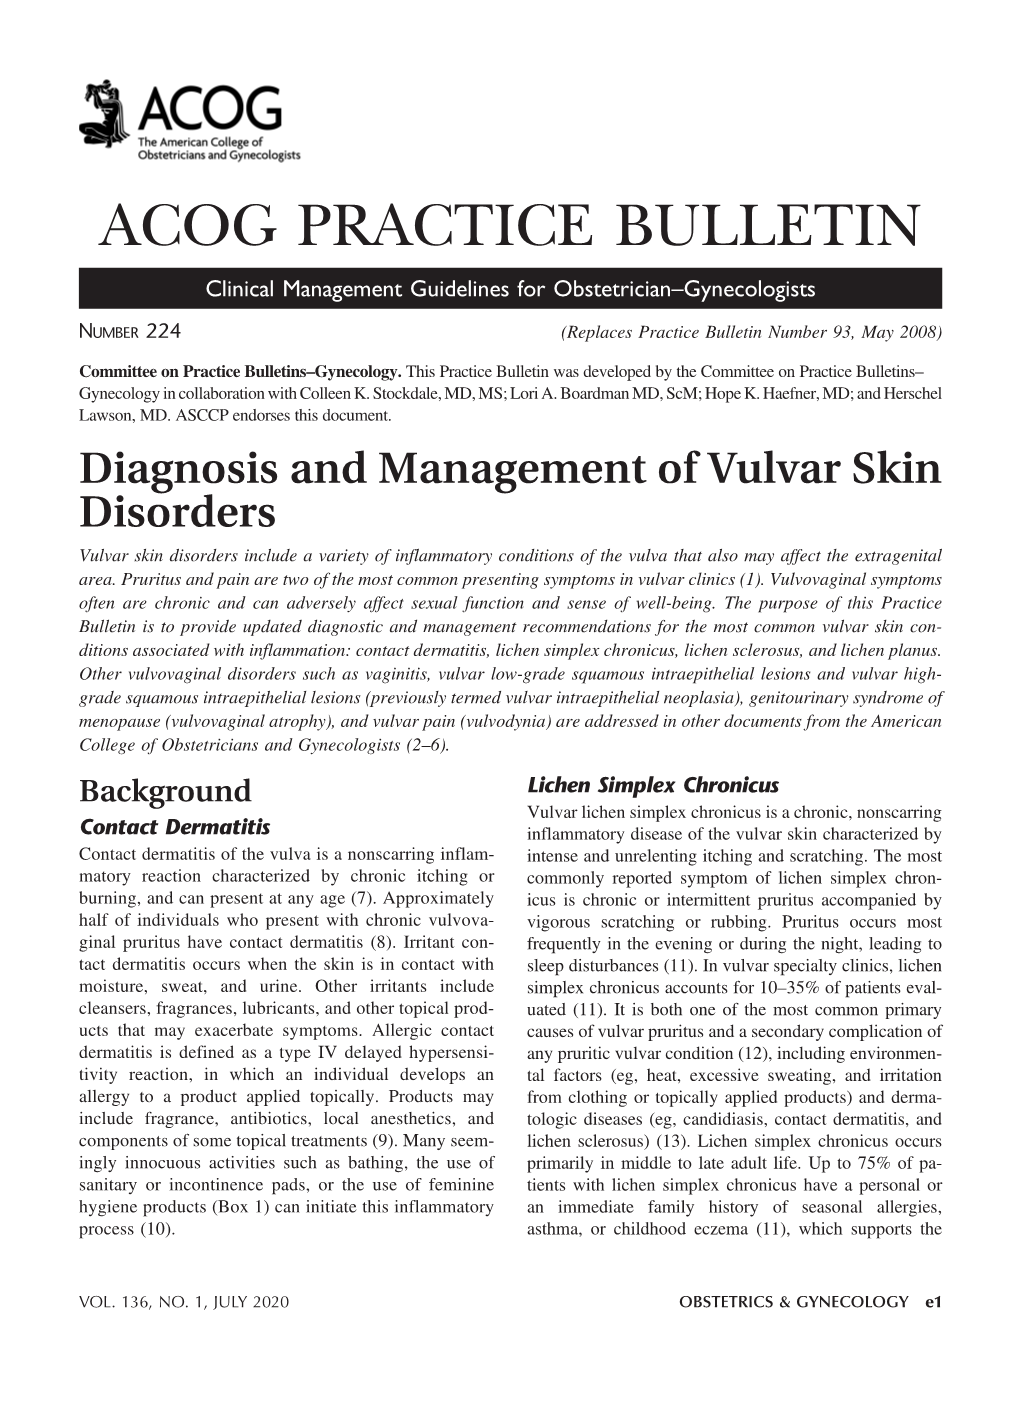 Diagnosis and Management of Vulvar Skin Disorders